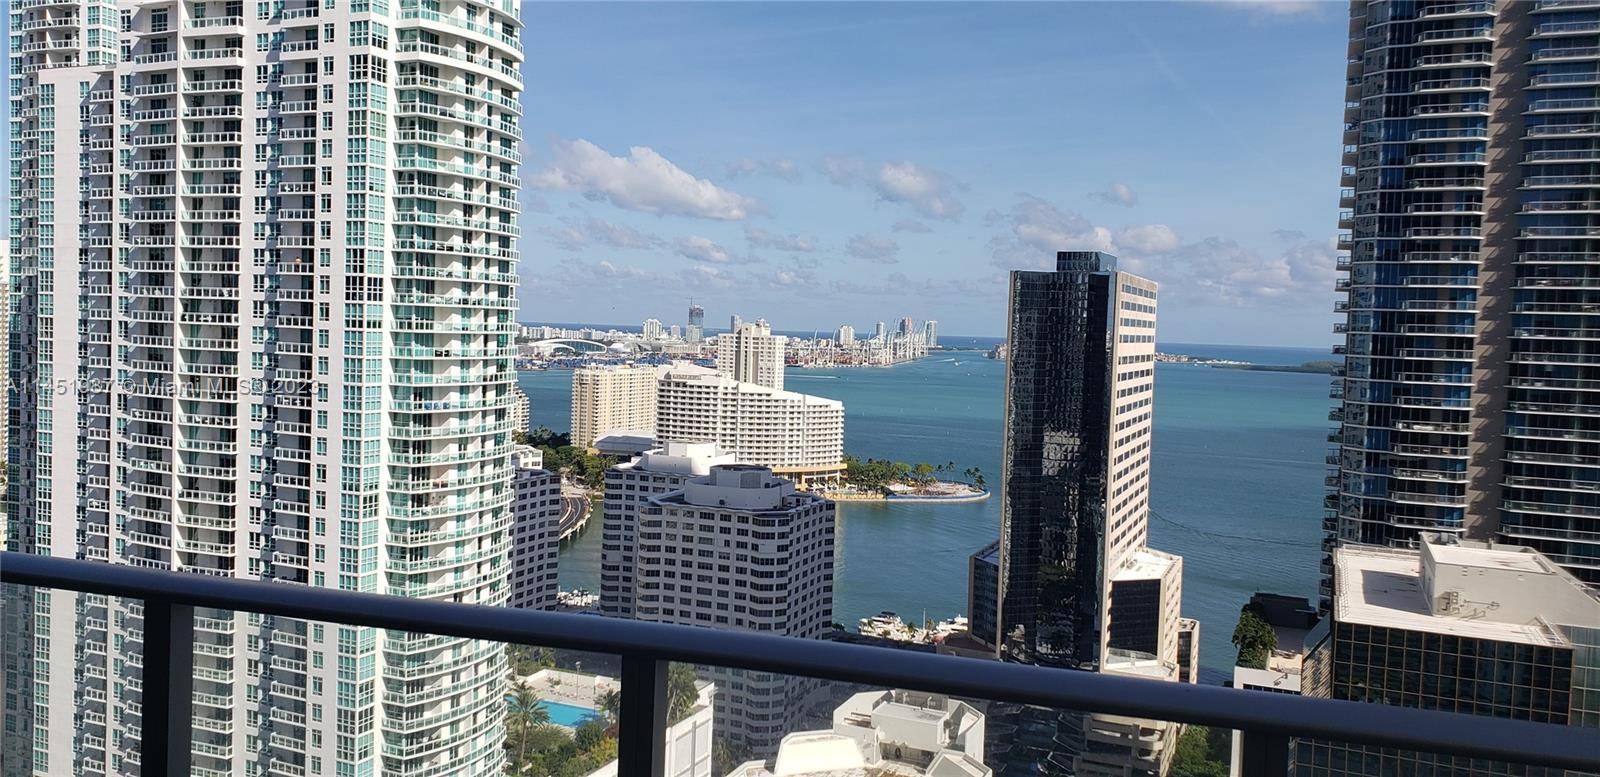 stunning masterpiece ! Unit 3205 has 3 bedrooms, 3 bathrooms, and open views of the Biscayne Bay.